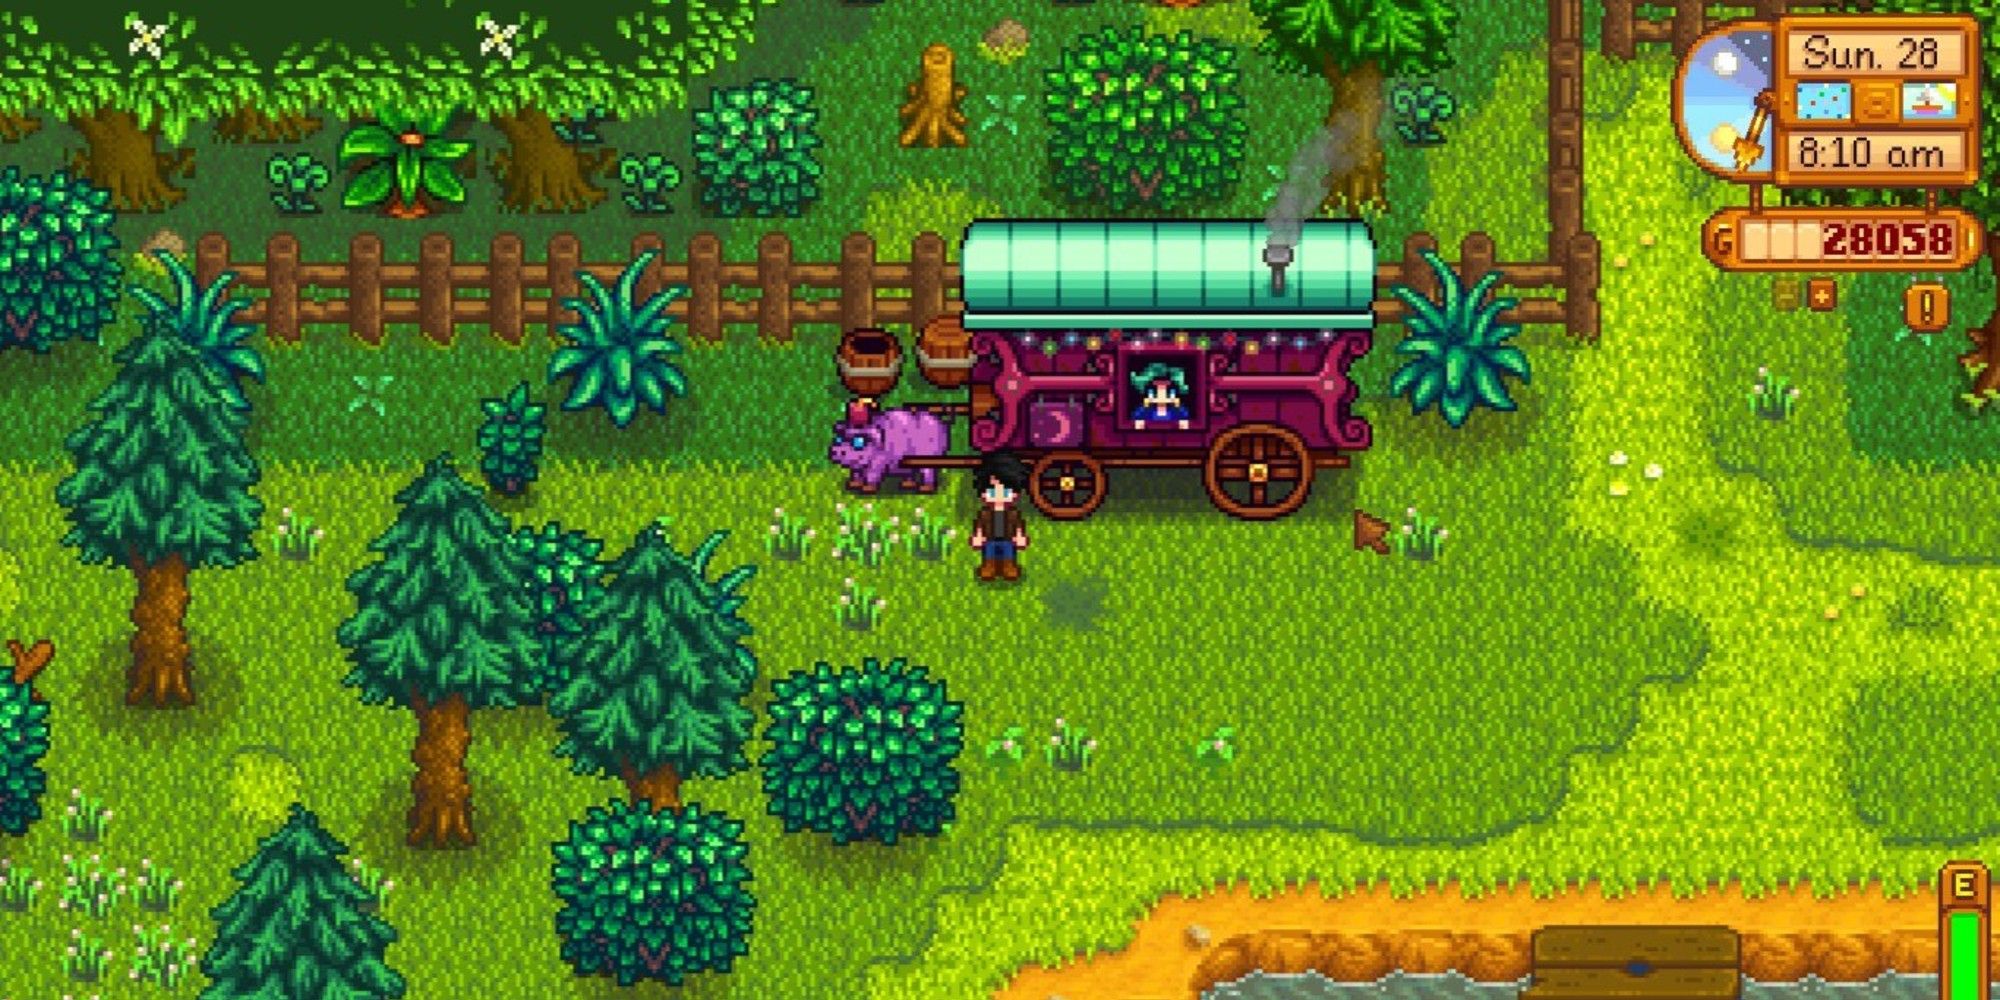 player standing next to traveling merchant cart